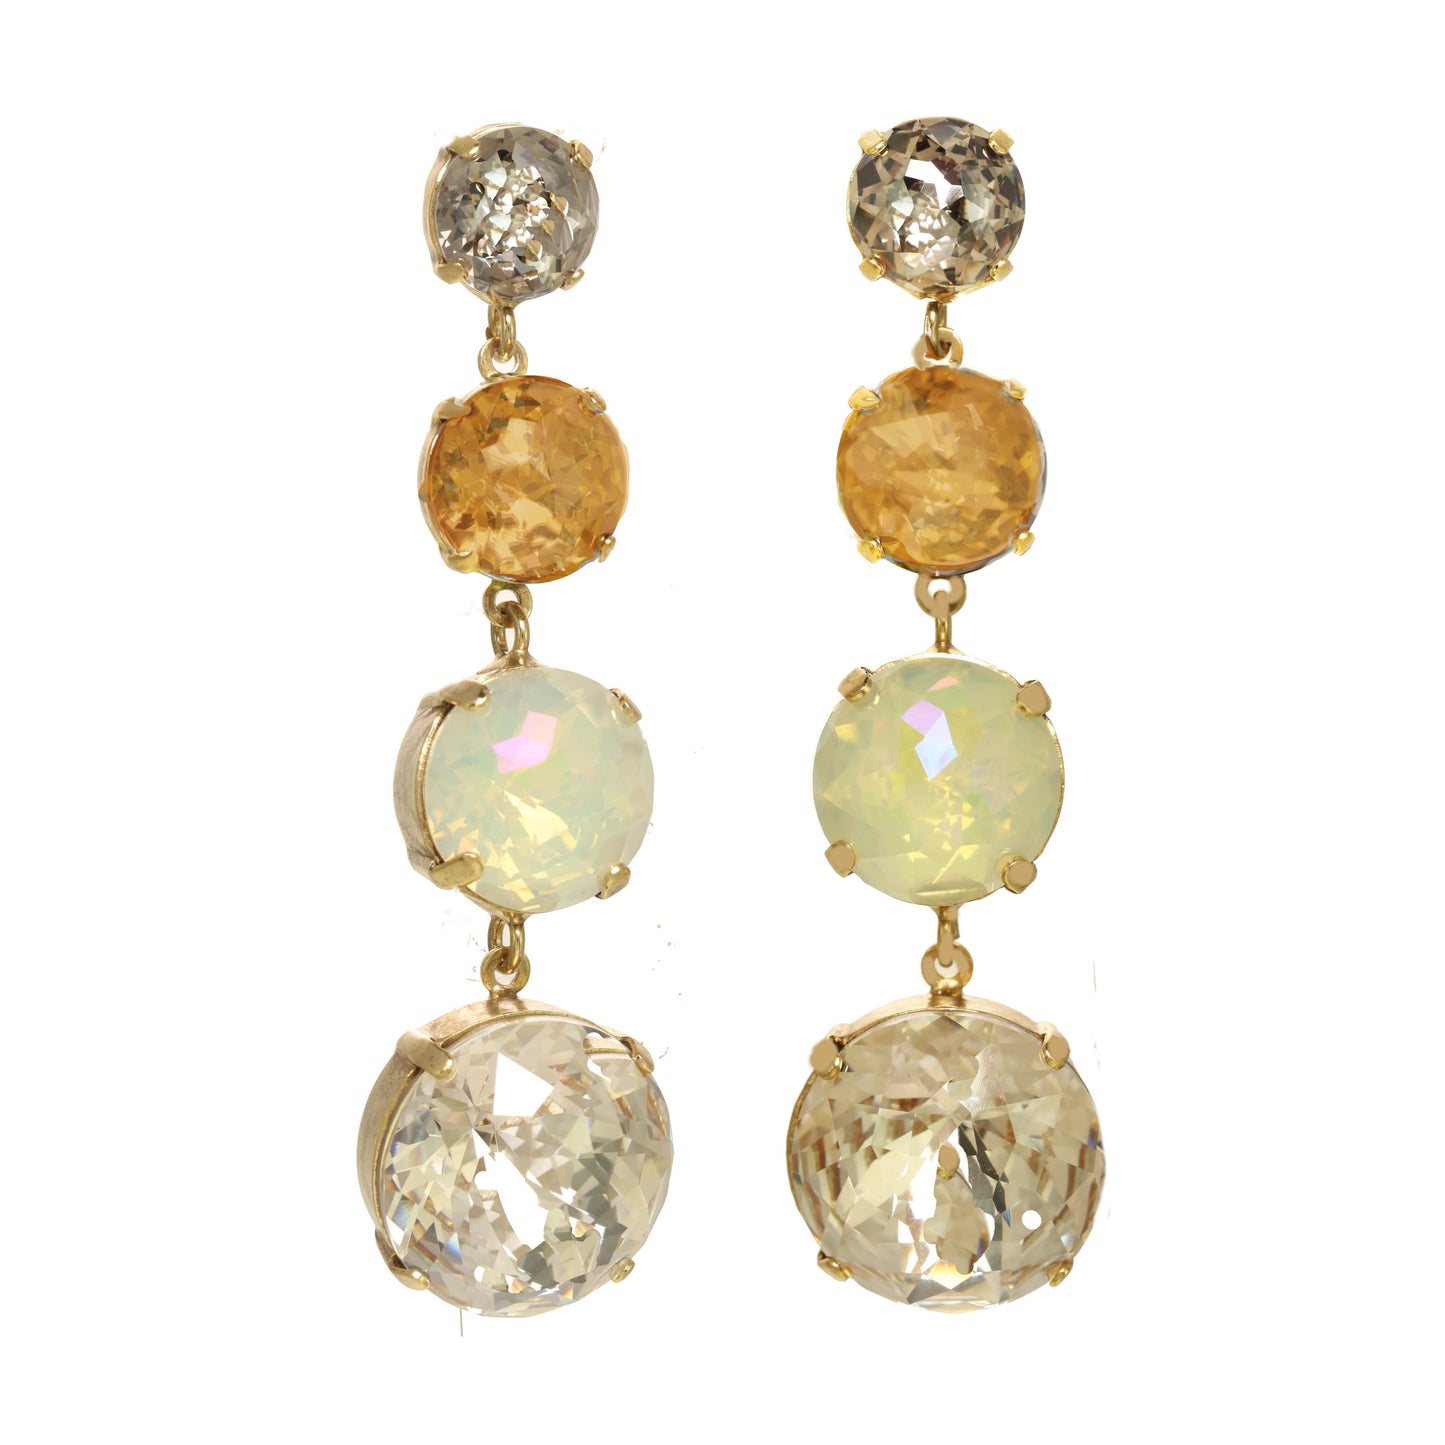 Tova Idina Earrings Champagne shimmer with a combination of light-catching crystals